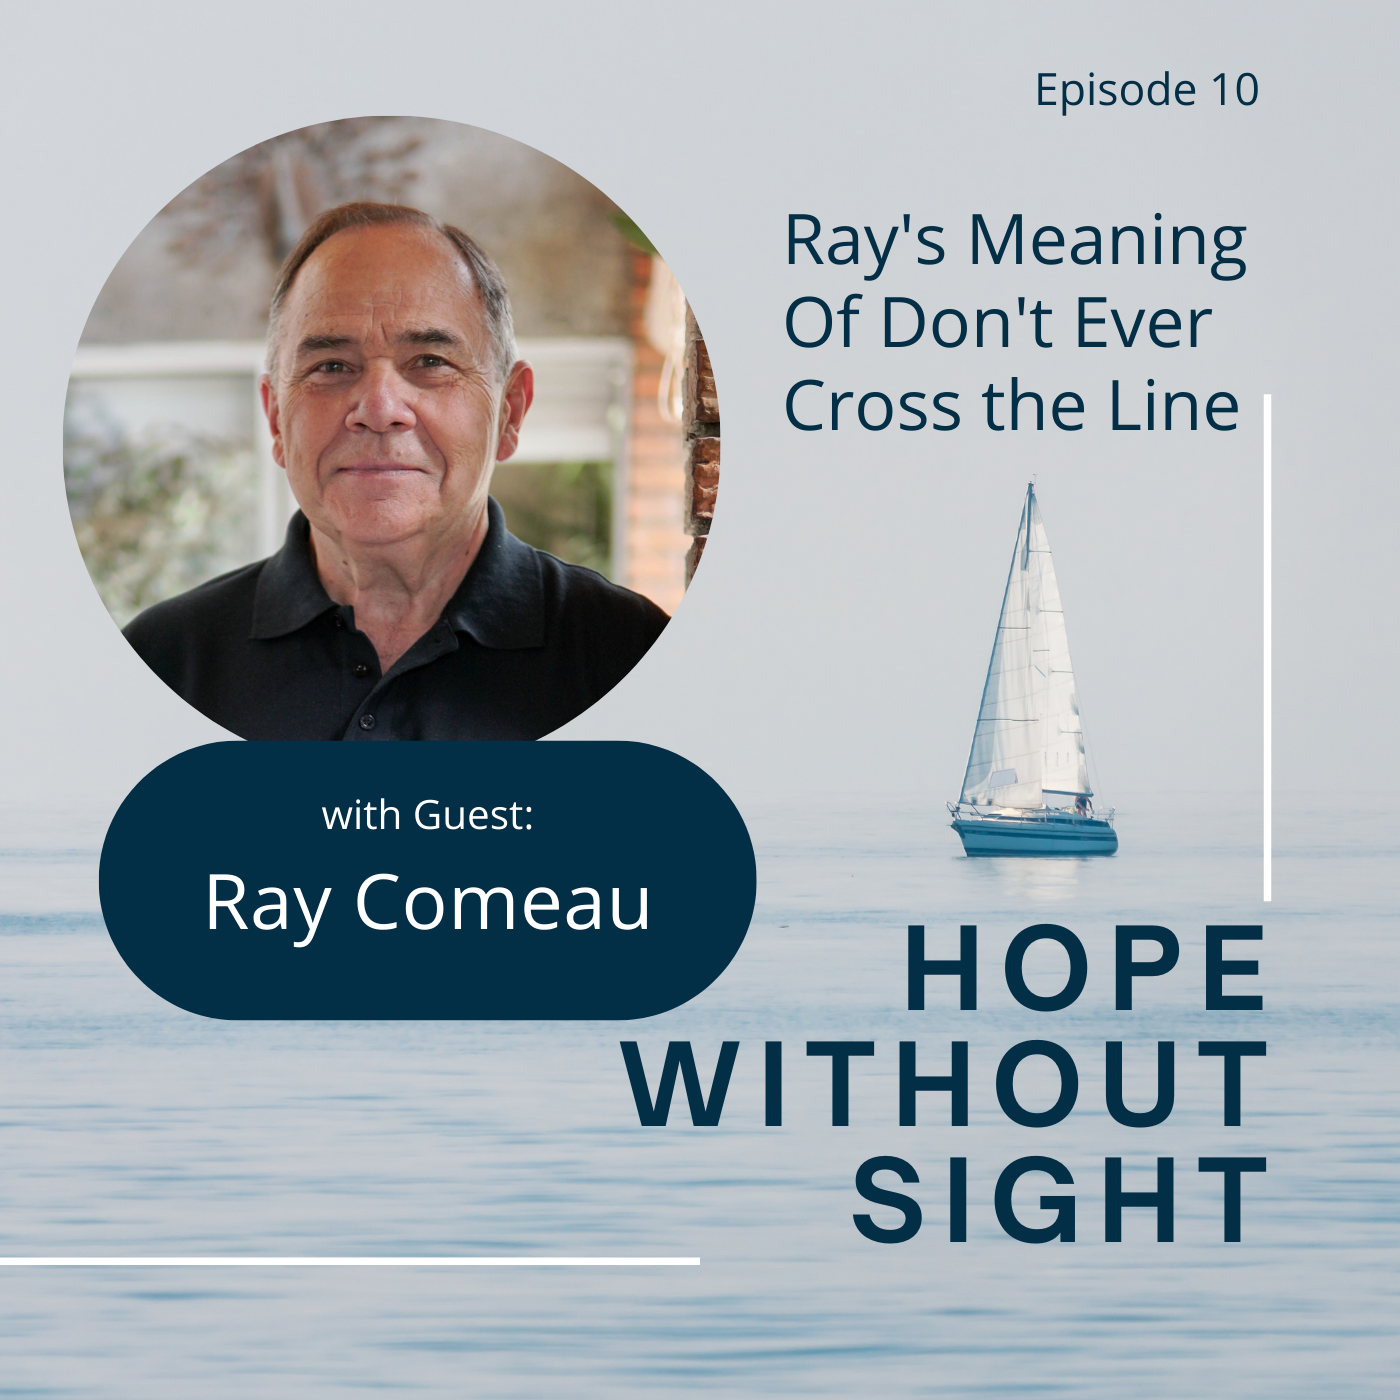 Ray Comeau’s Meaning Of Don’t Ever Cross The Line